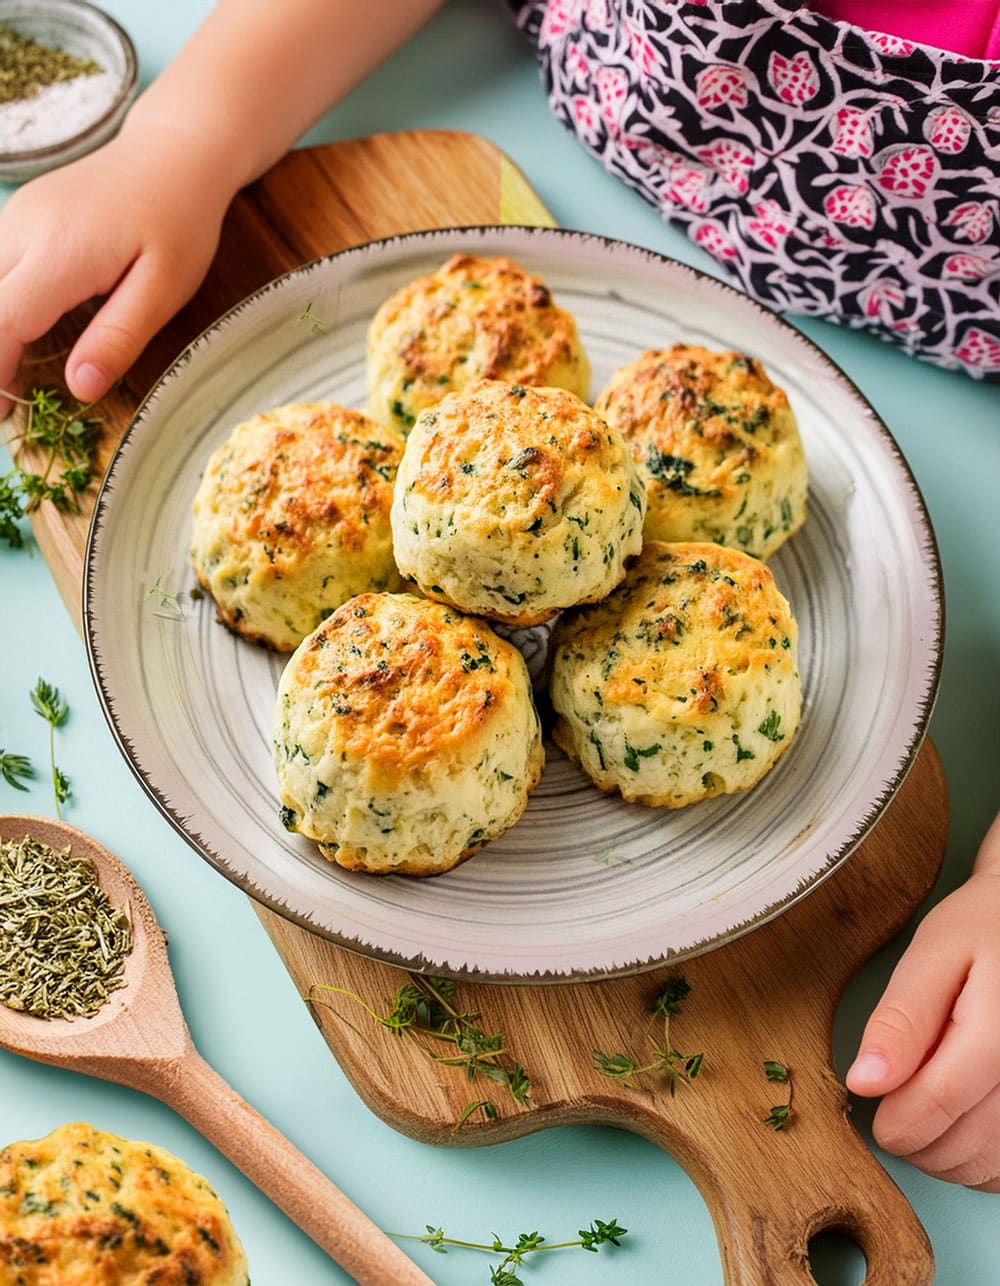 Herby cheese scones